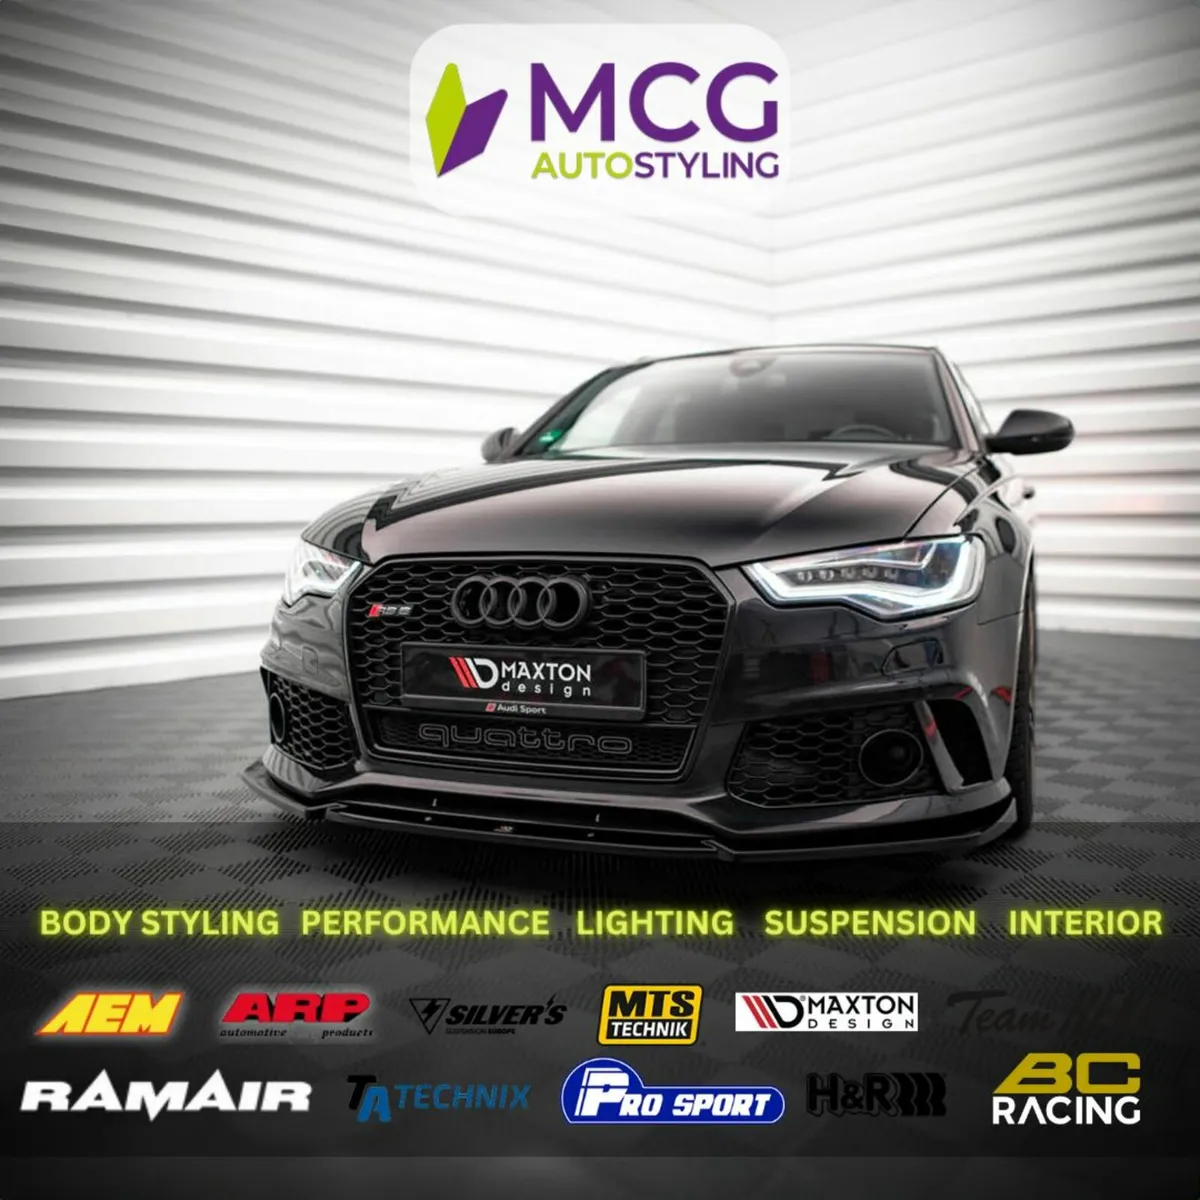 Audi A6 C7 & C8 Bodystyling, Parts & Accessories